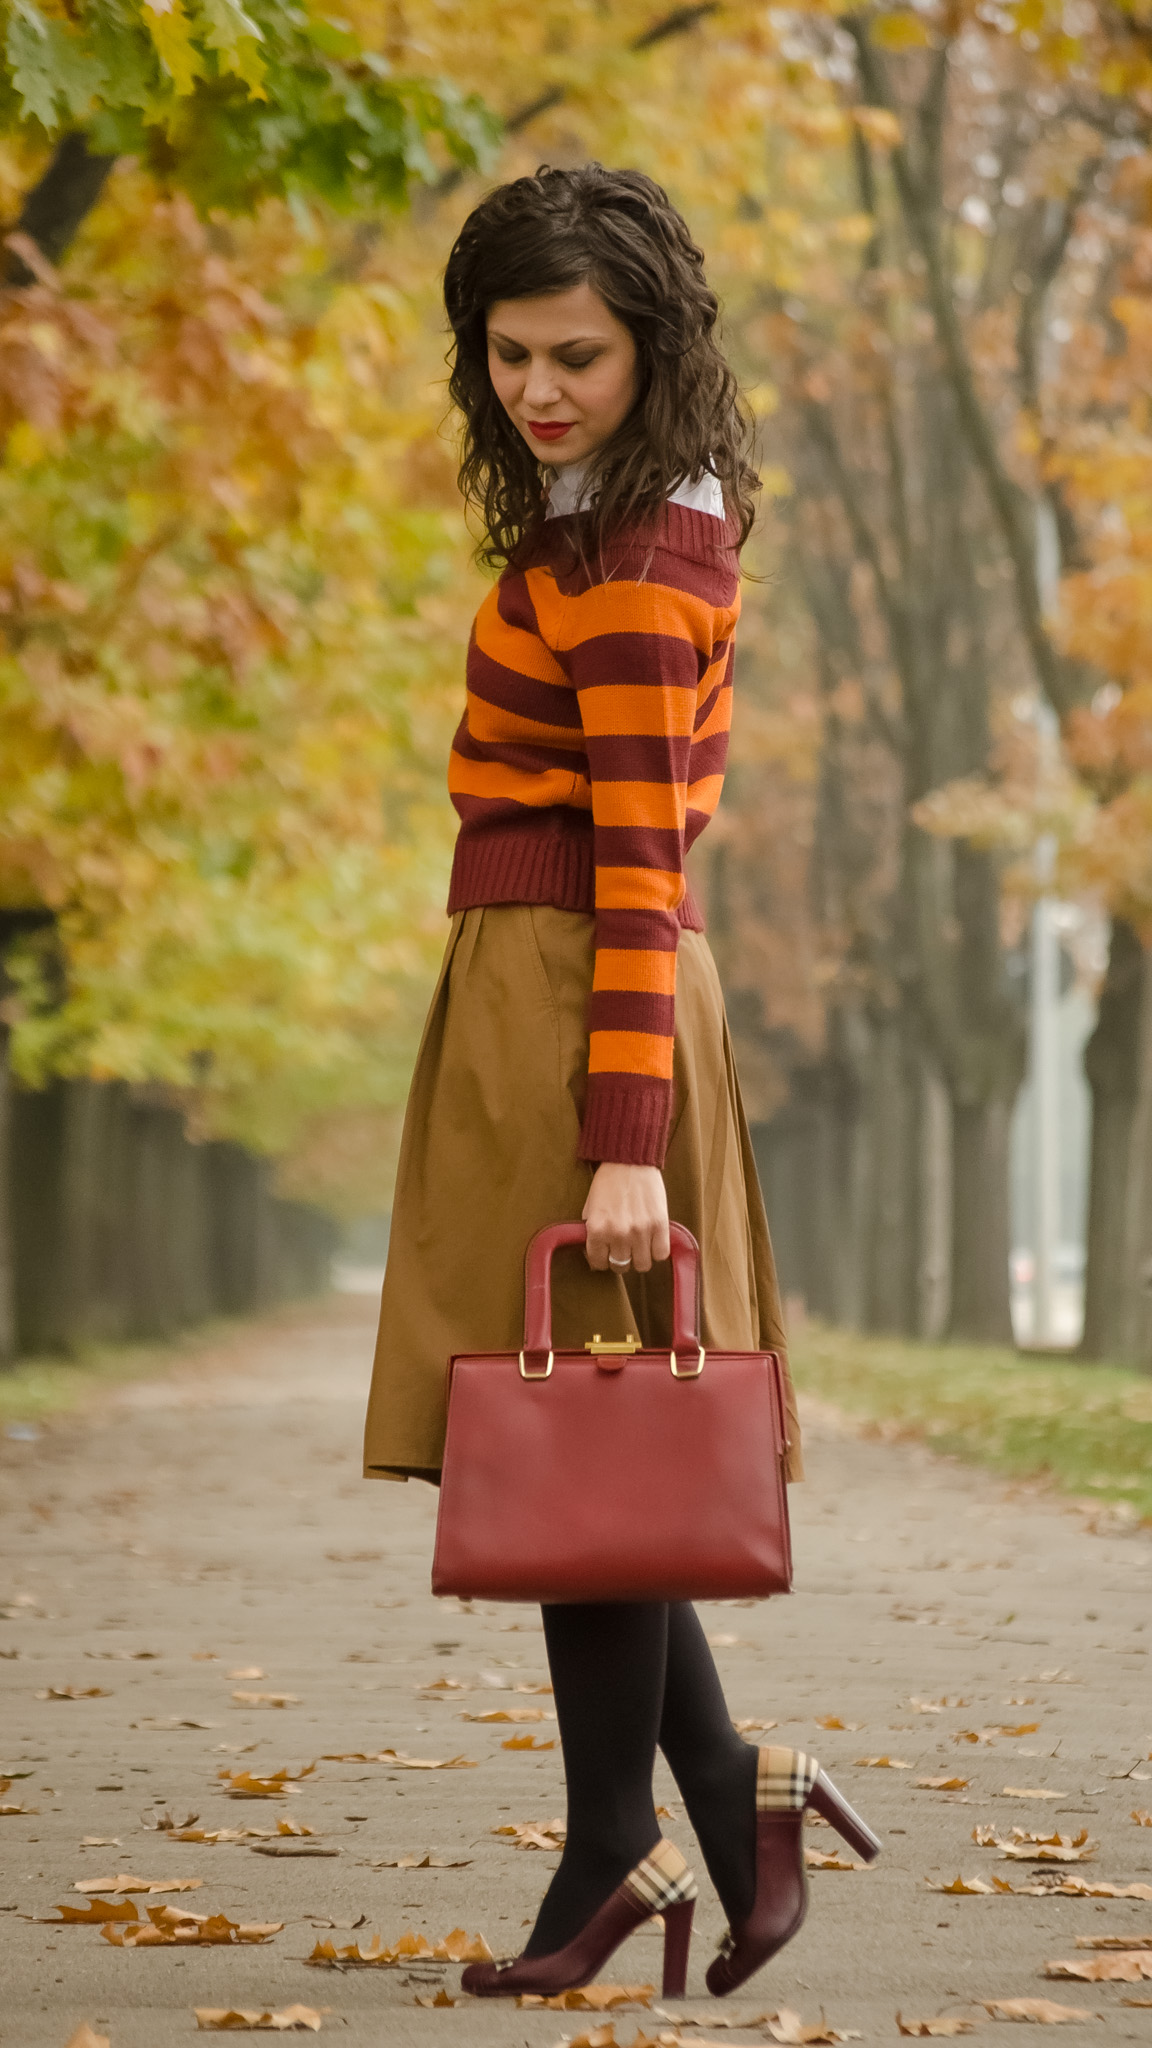 harry potter fall outfit brown skirt burgundy orange sweater shoes heels bag autumn scenery fallen leaves